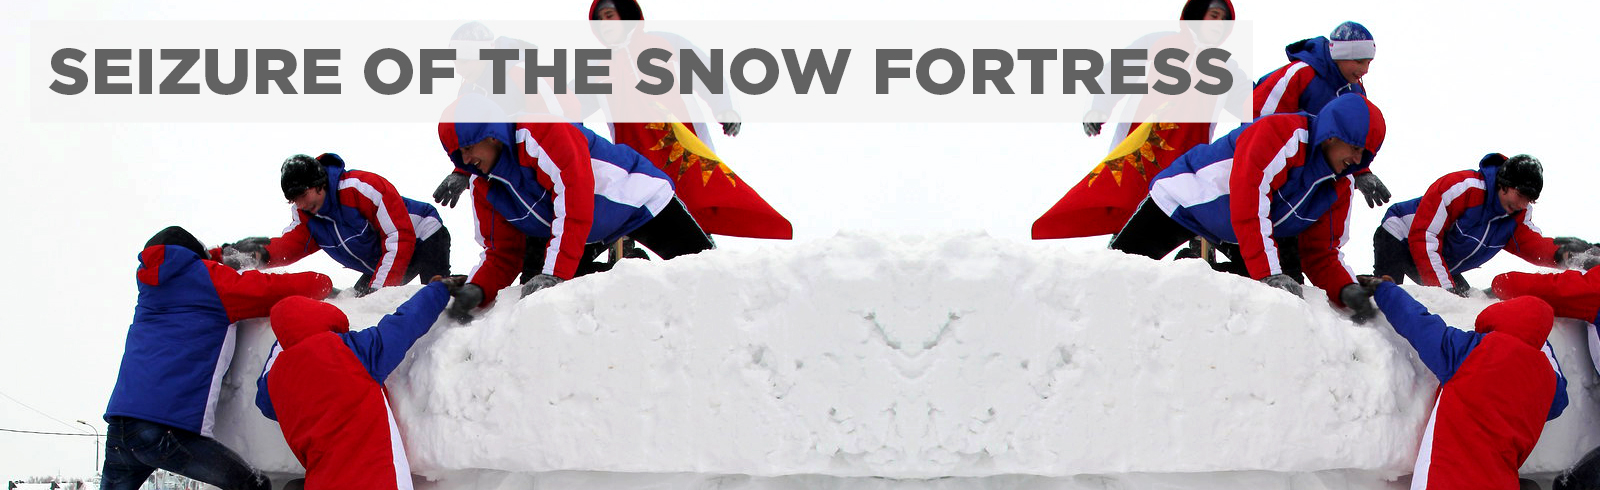 Seizure of the Snow Fortress